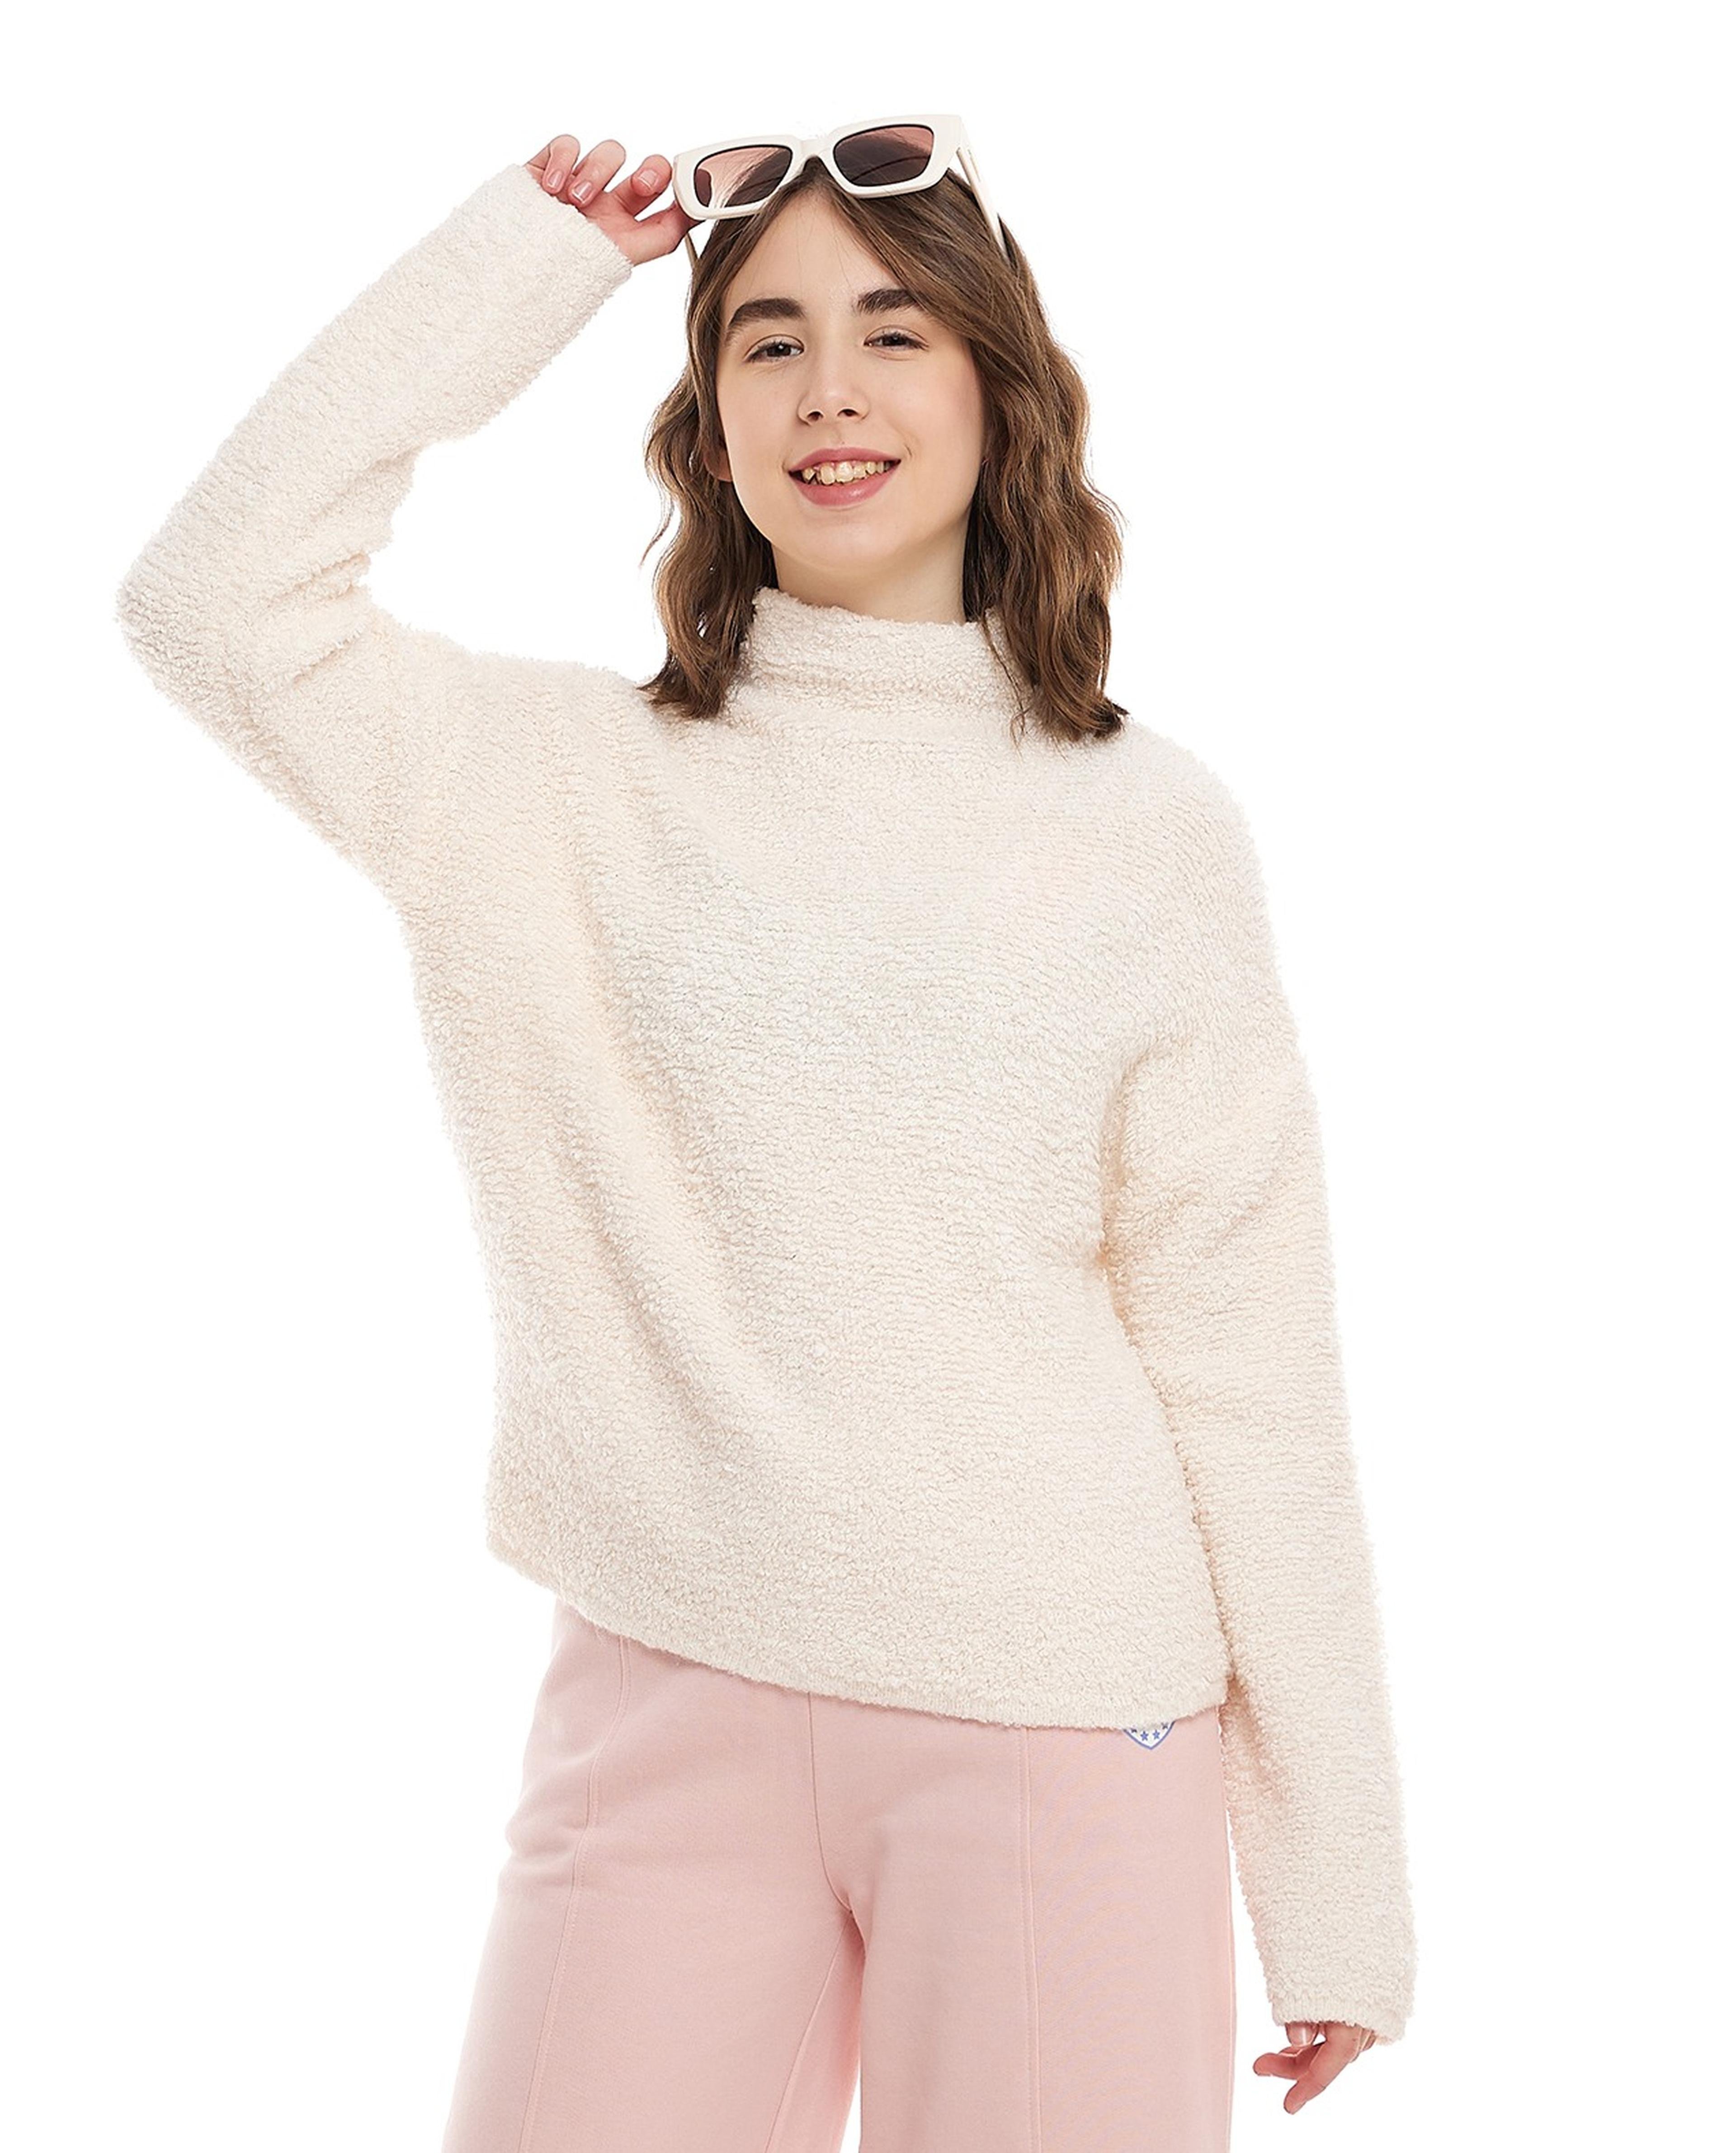 Solid Sweater with High Neck and Long Sleeves